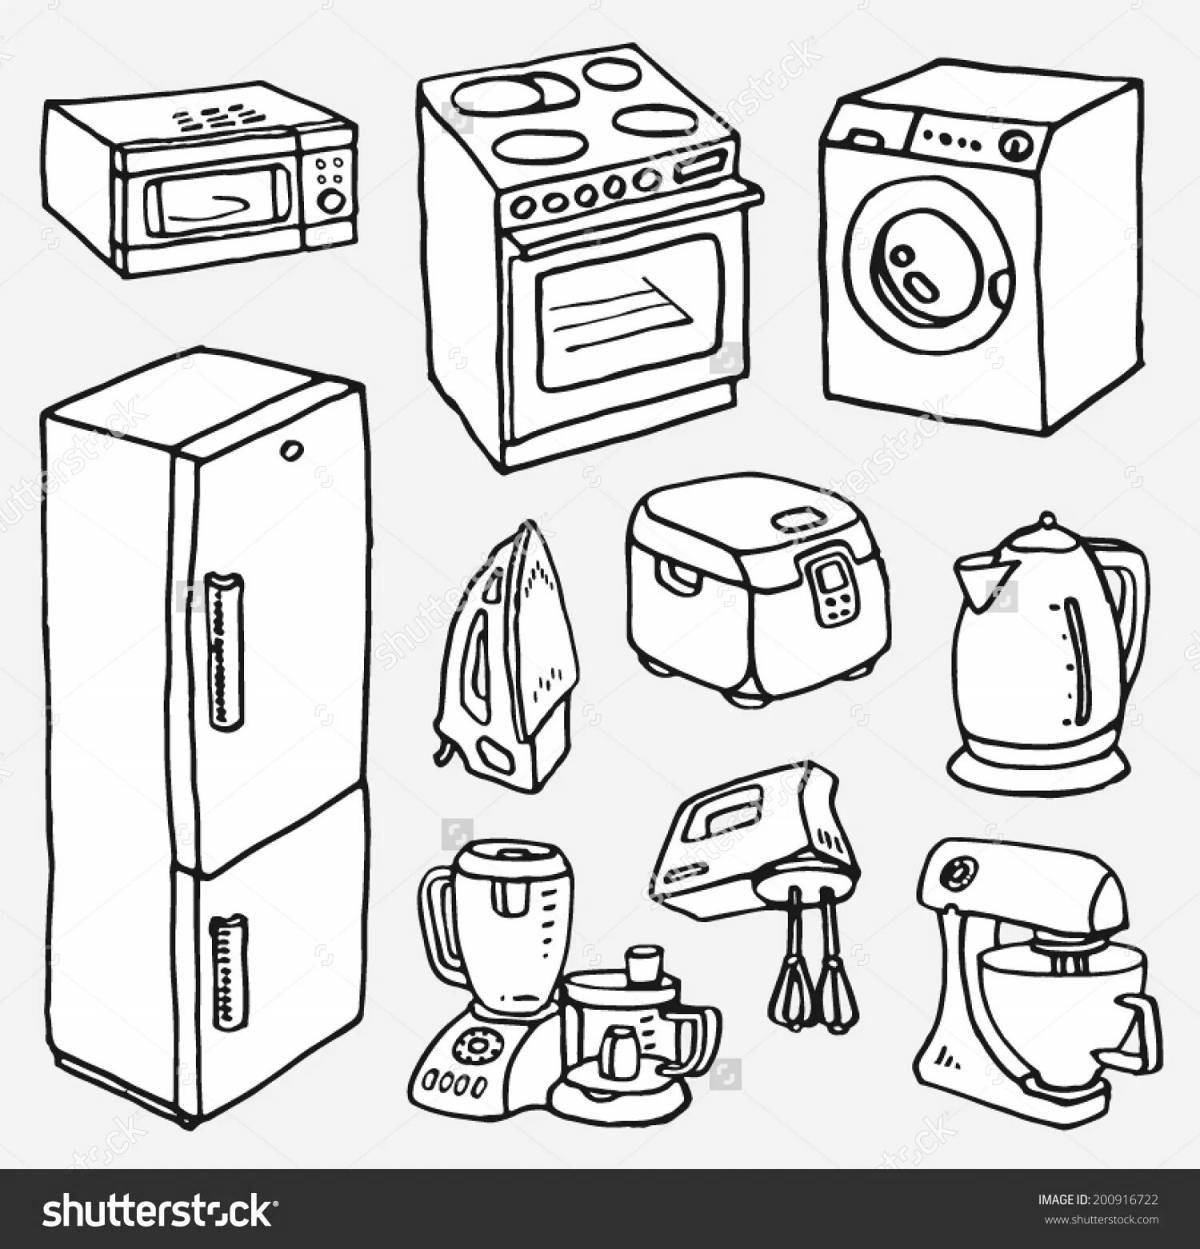 Adorable coloring book household appliances for teens